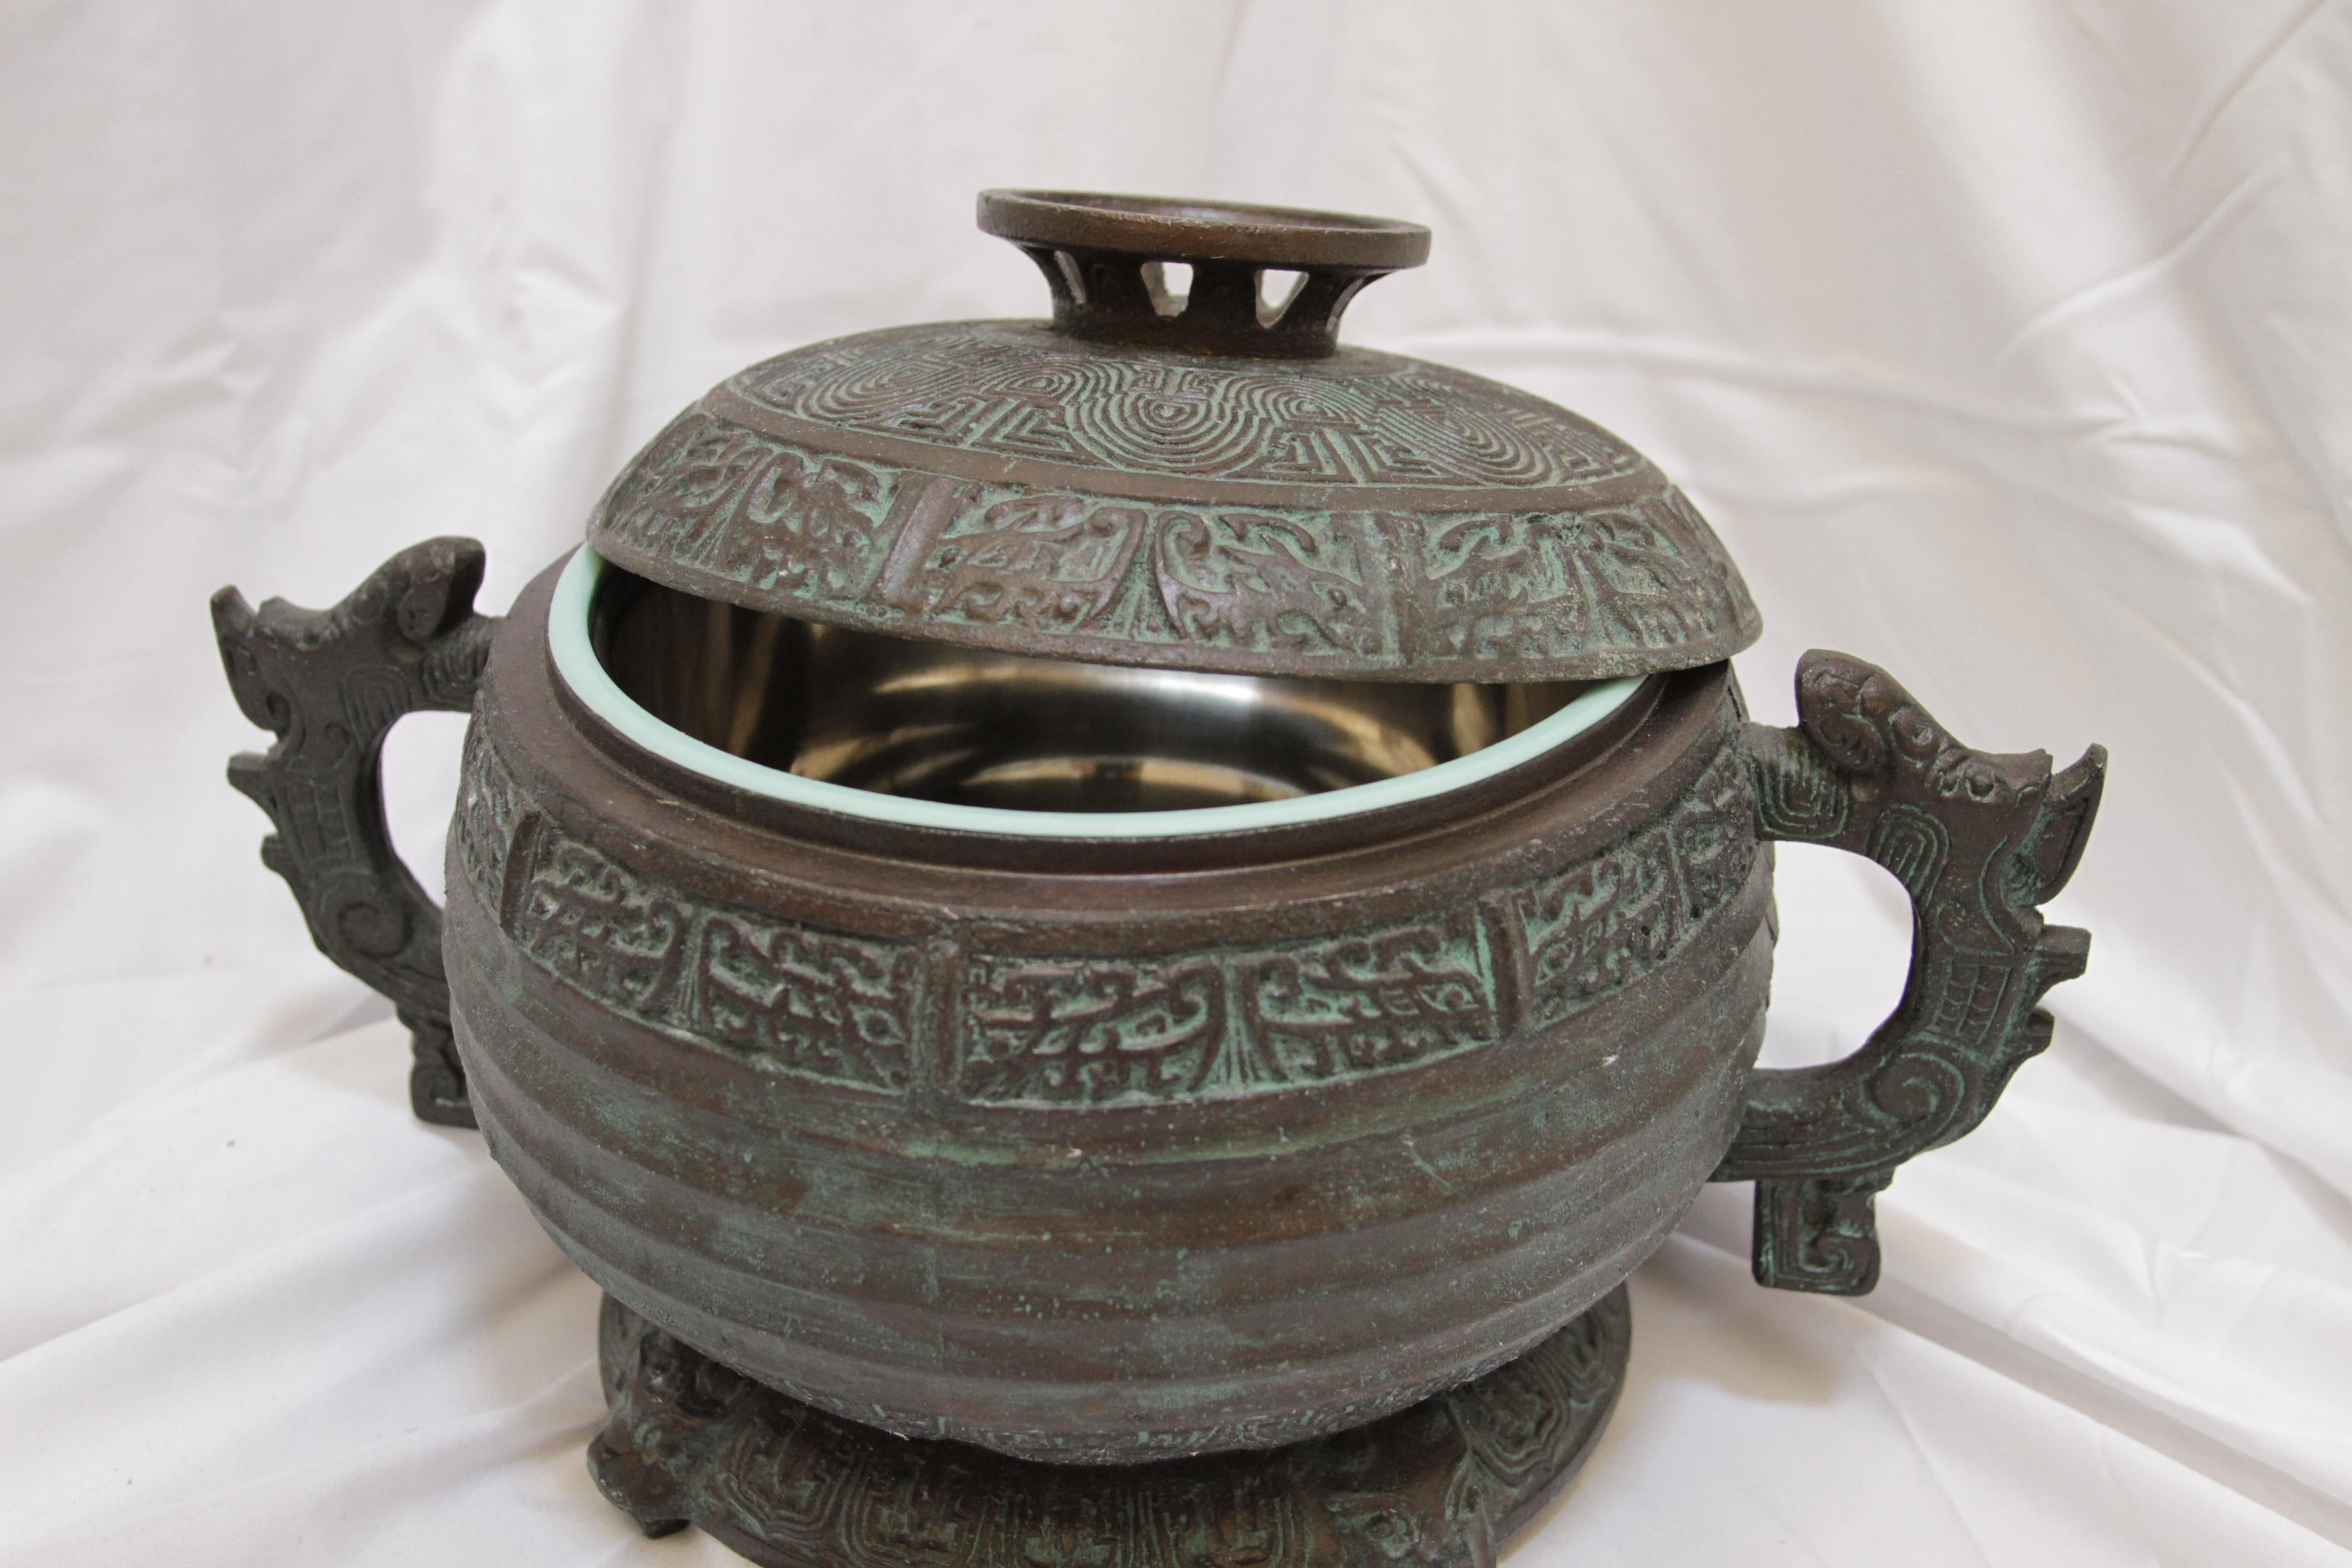 The shape and color of this verdigris ice bucket that appears to be carved stone is stunning. It has a story, in that it is from a collection of barware that is based on artifacts from the Shiang Dynasty--the earliest dynasty of traditional Chinese